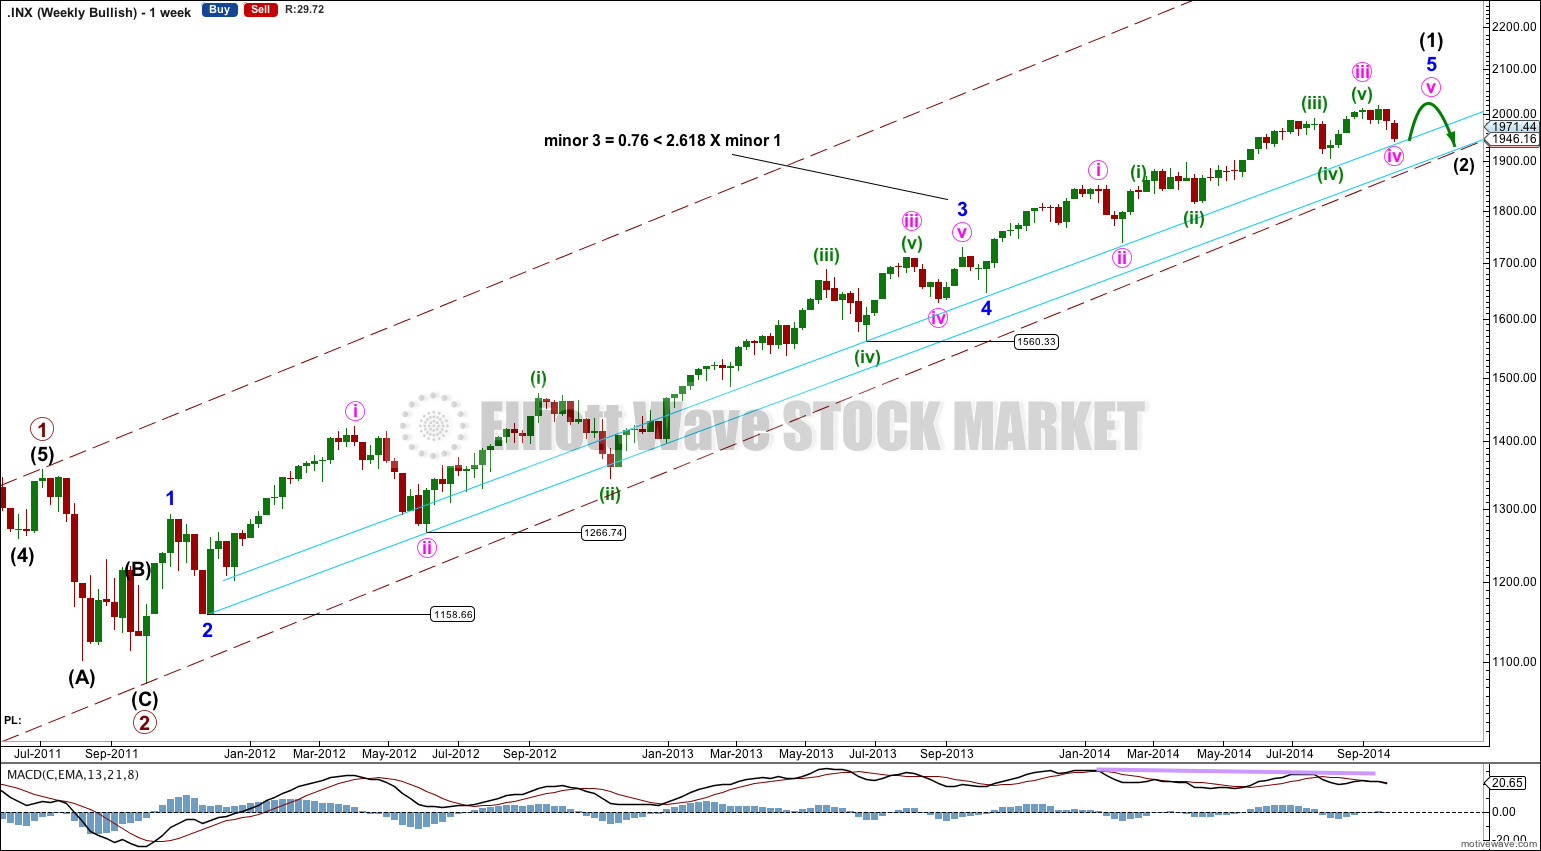 S&P 500 weekly 2014